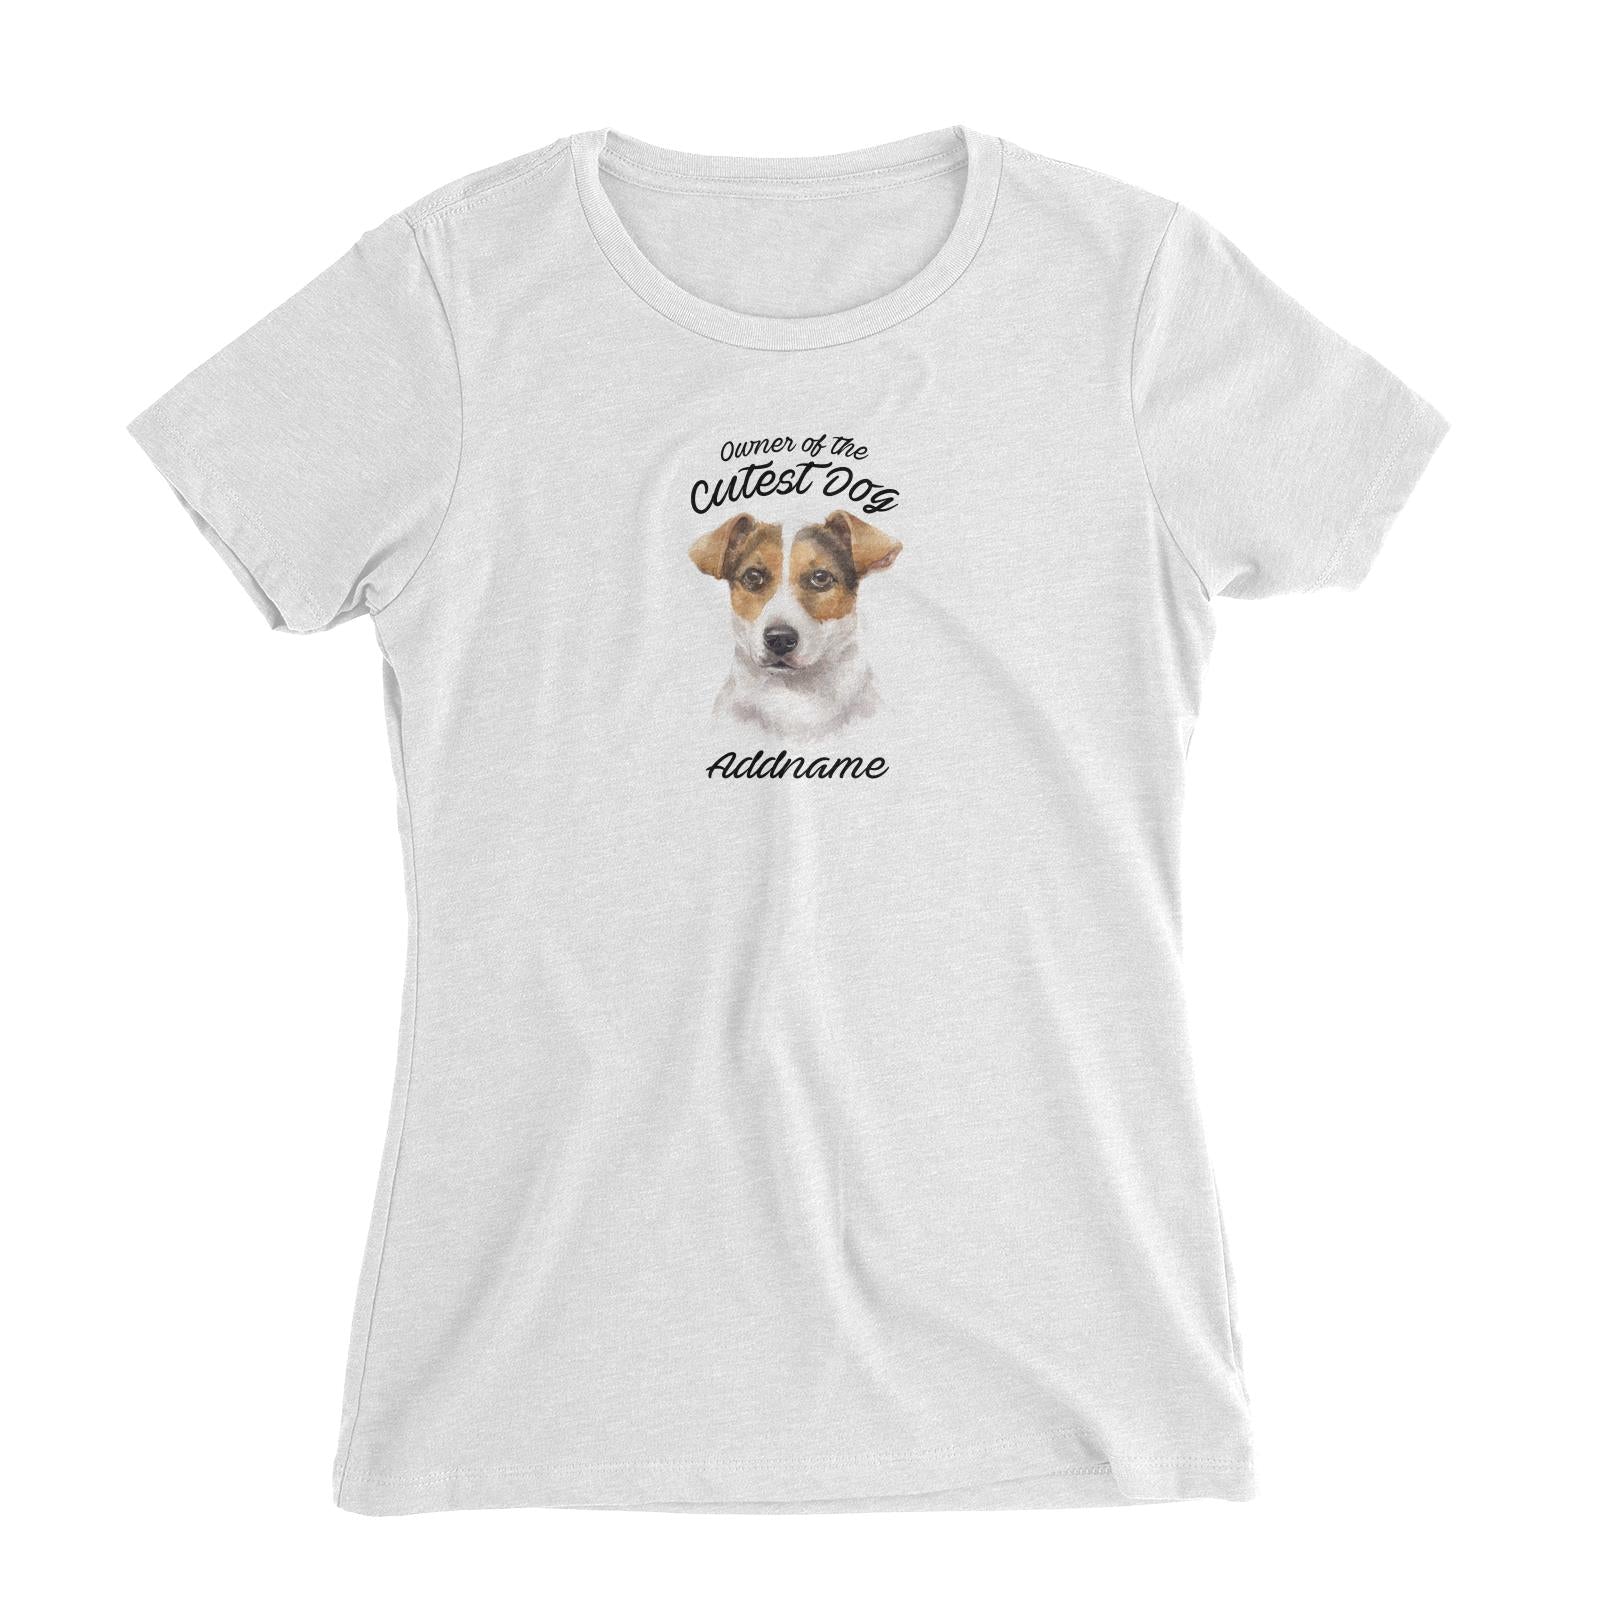 Watercolor Dog Owner Of The Cutest Dog Jack Russell Short Hair Addname Women's Slim Fit T-Shirt